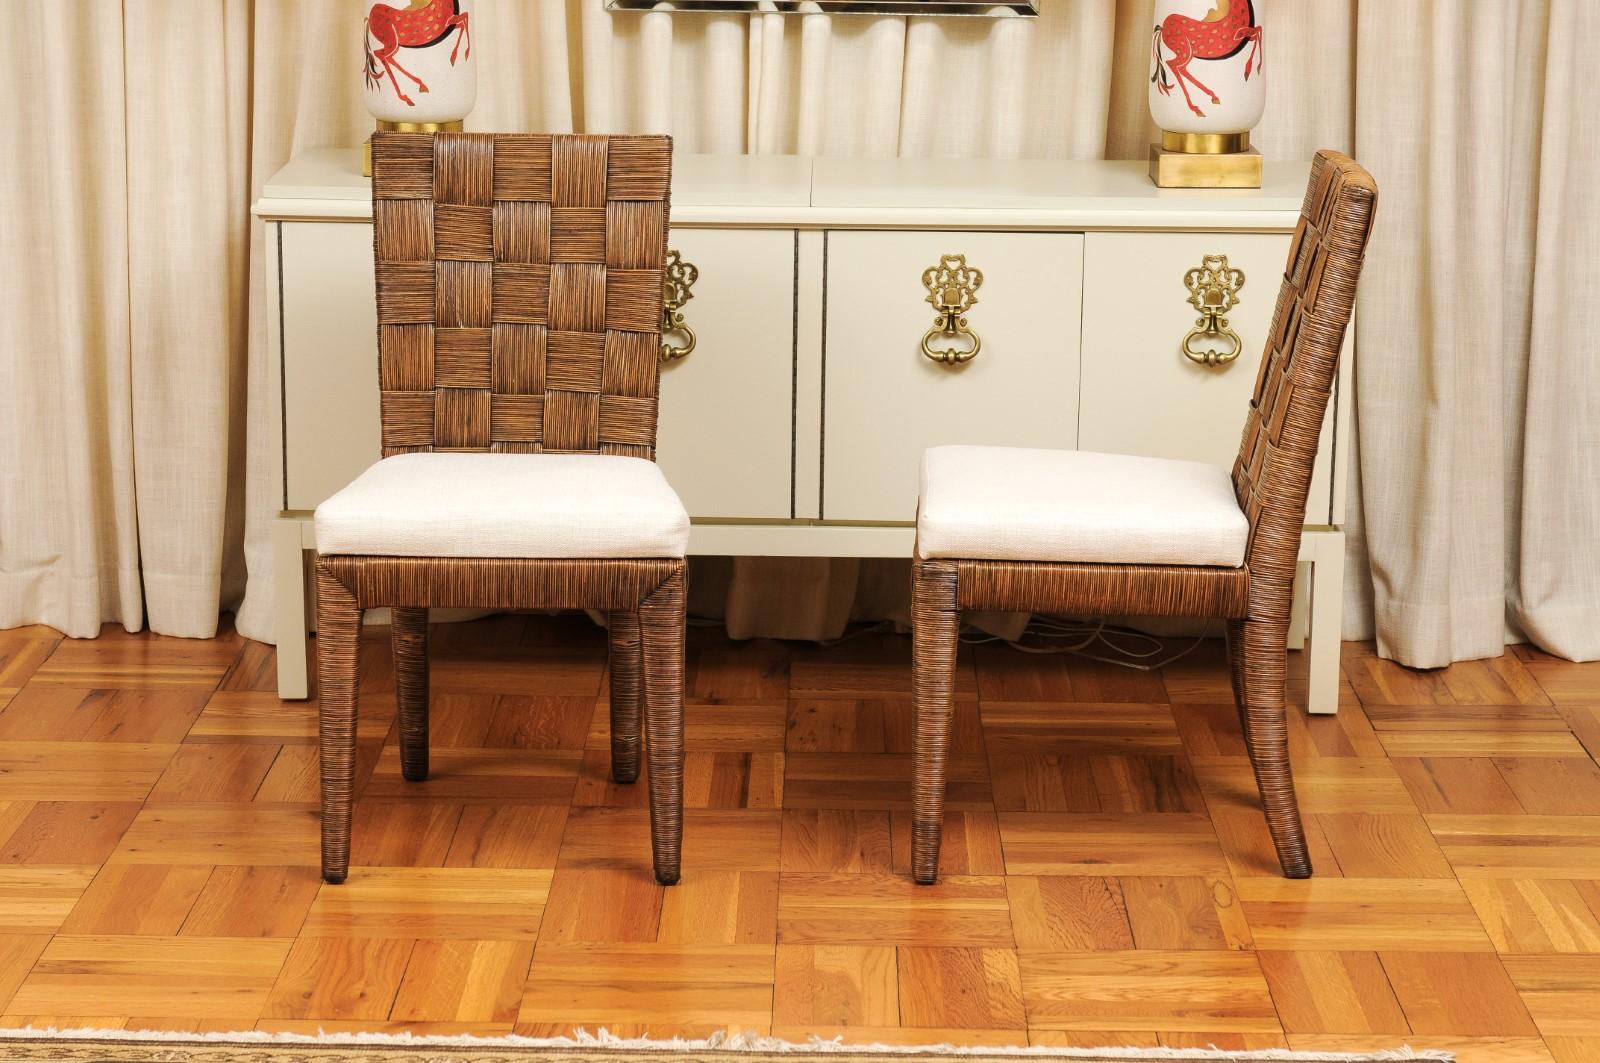 Stellar Restored Set of 16 Block Island Cane Chairs by John Hutton for Donghia For Sale 10